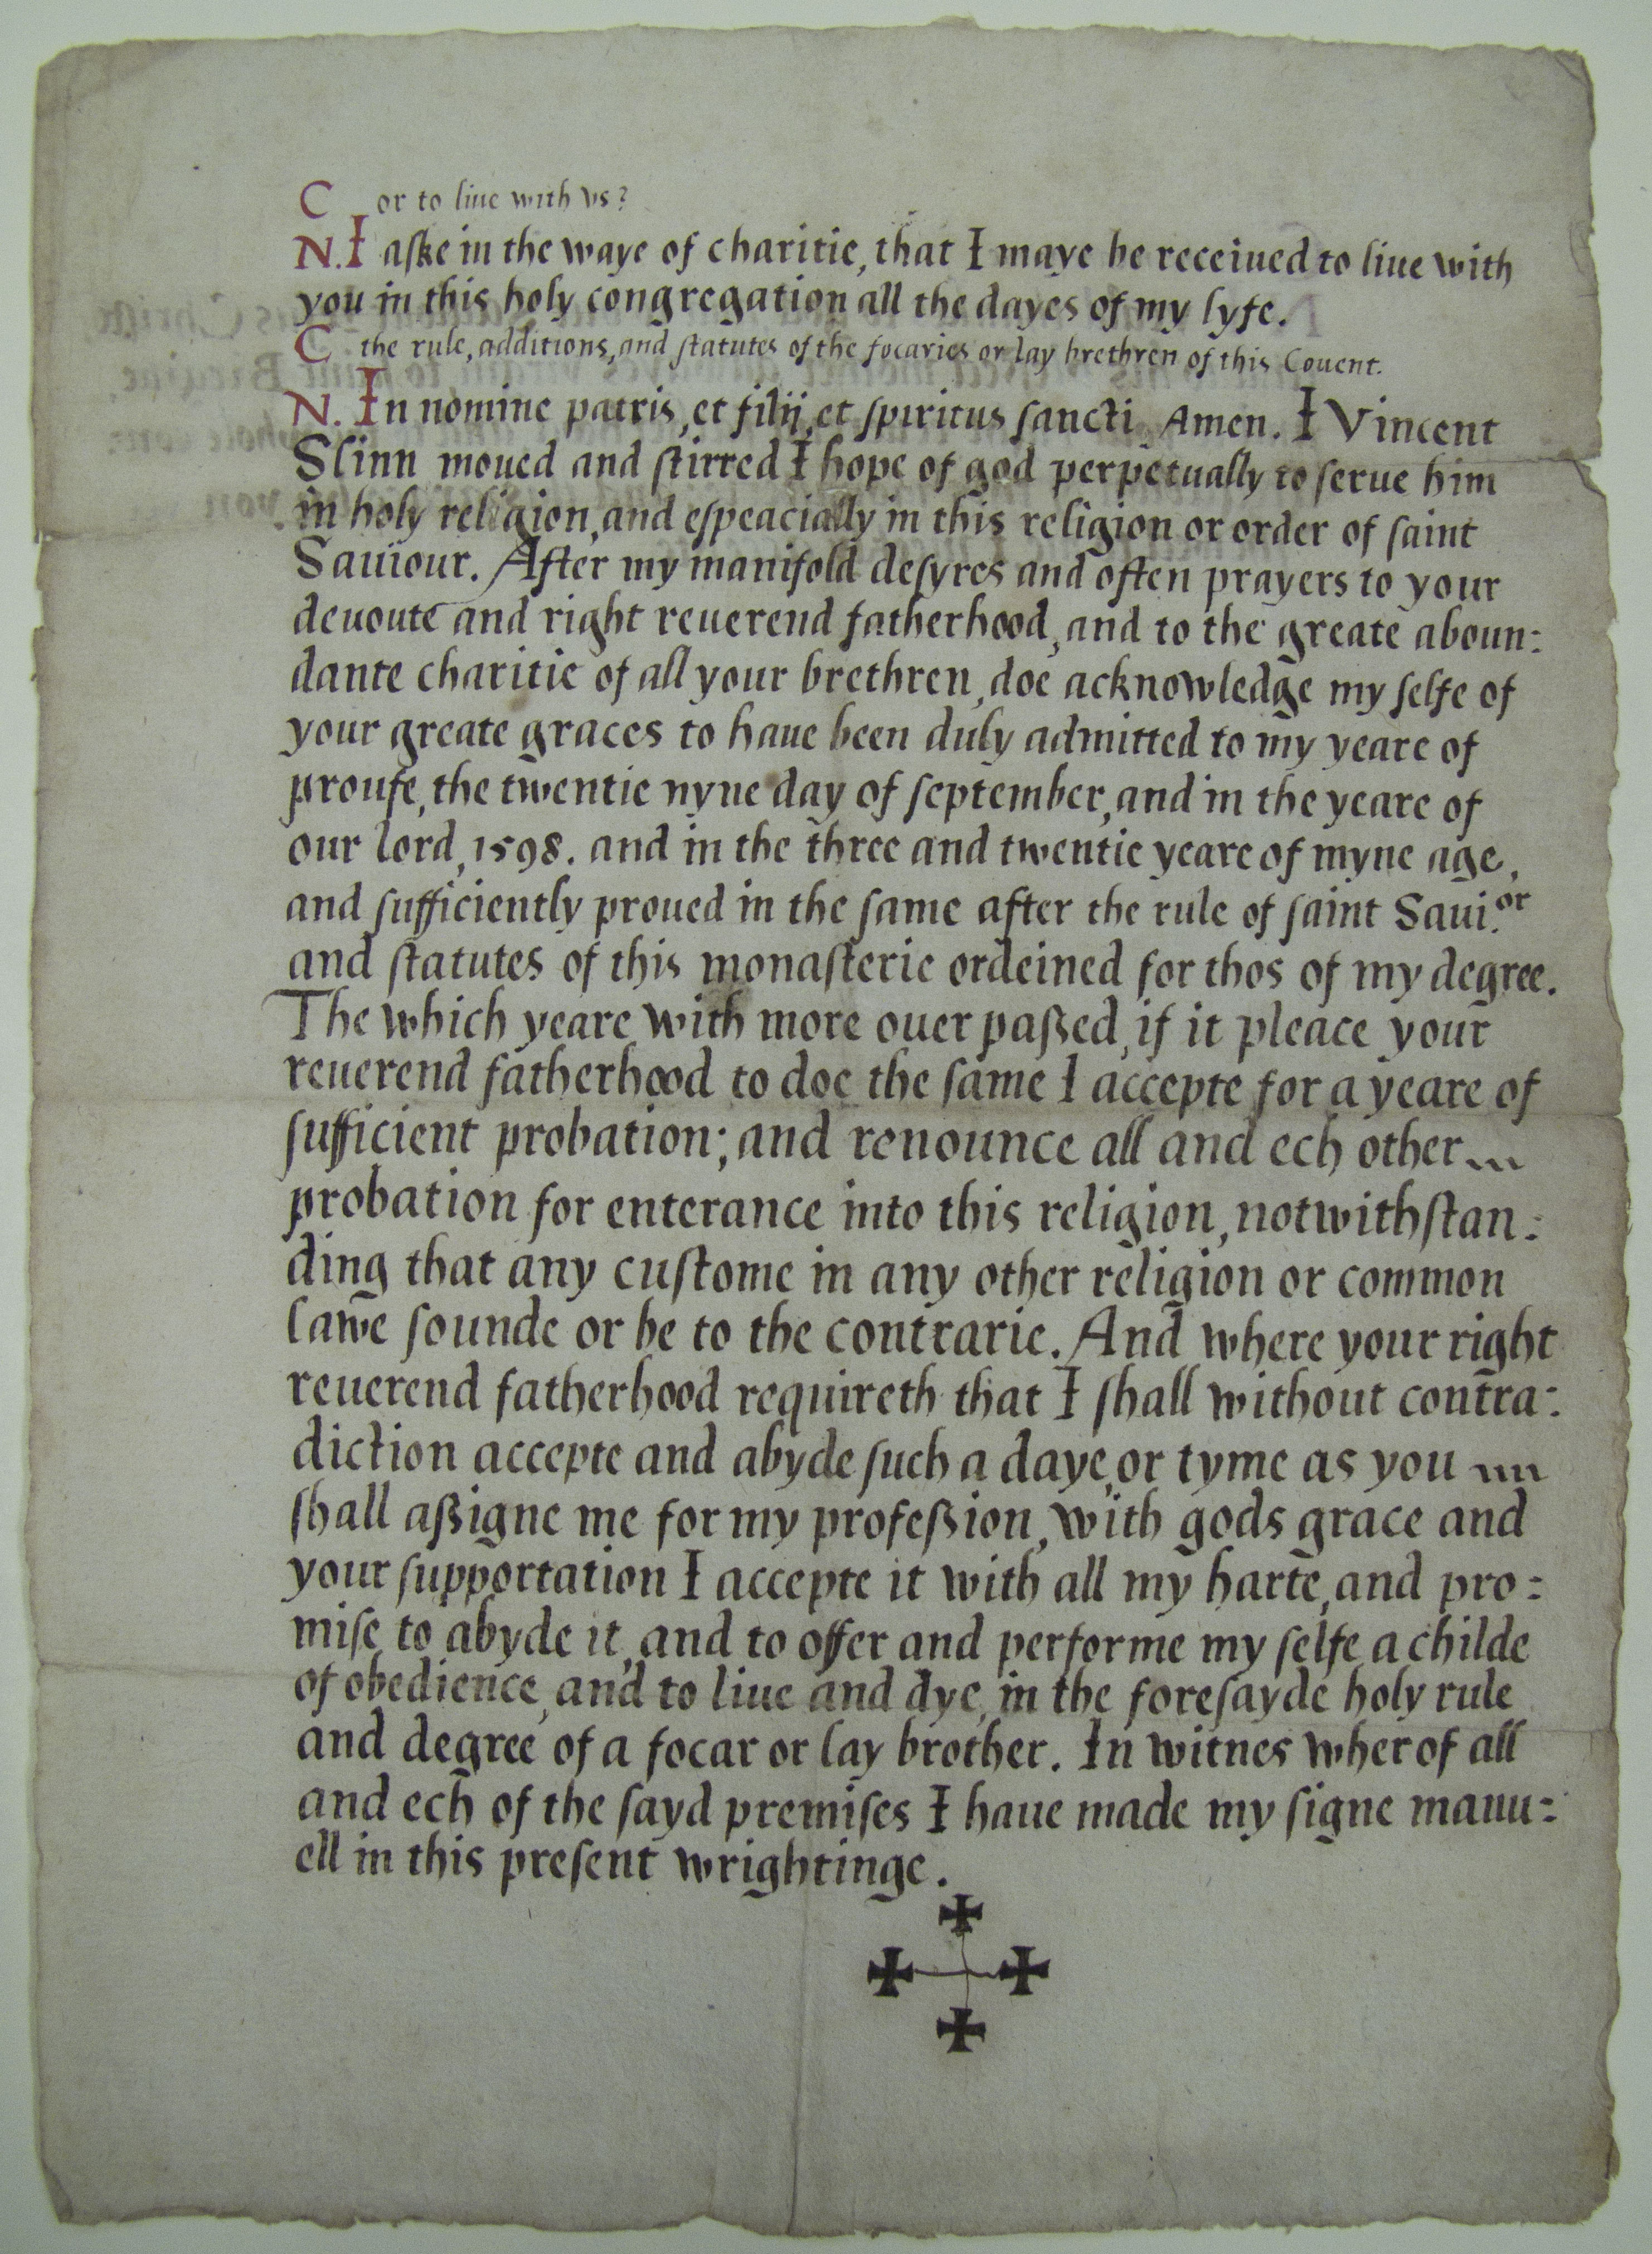 Certificate of Syon brother, Vincent Slinn, dated 1598 (ref: EUL MS 389/COM/3/1)